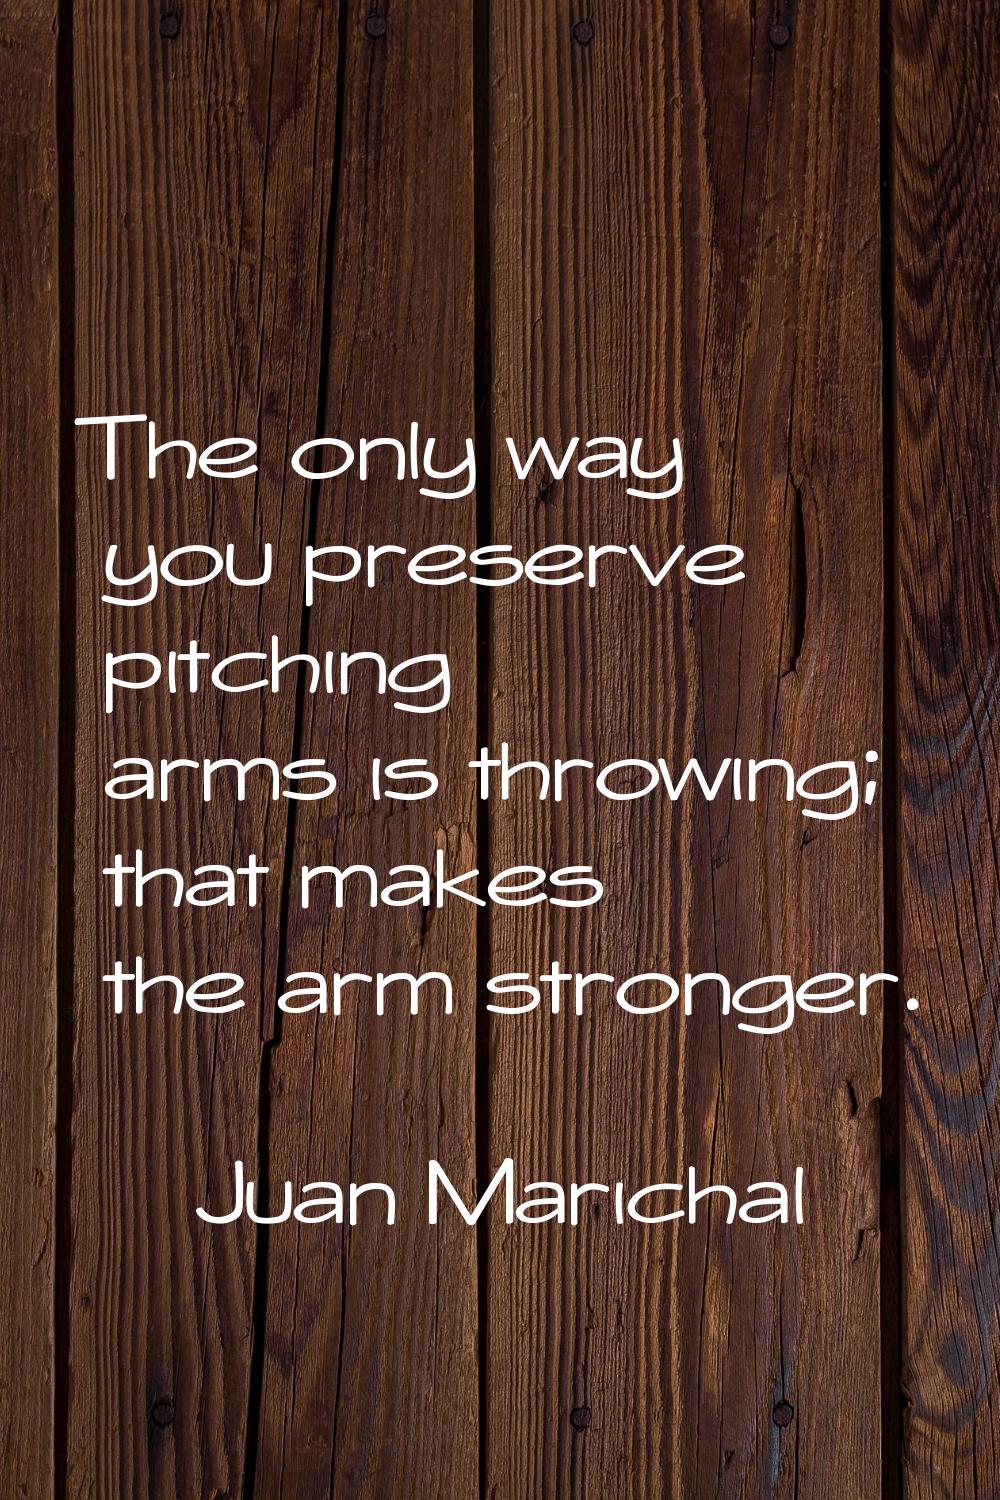 The only way you preserve pitching arms is throwing; that makes the arm stronger.